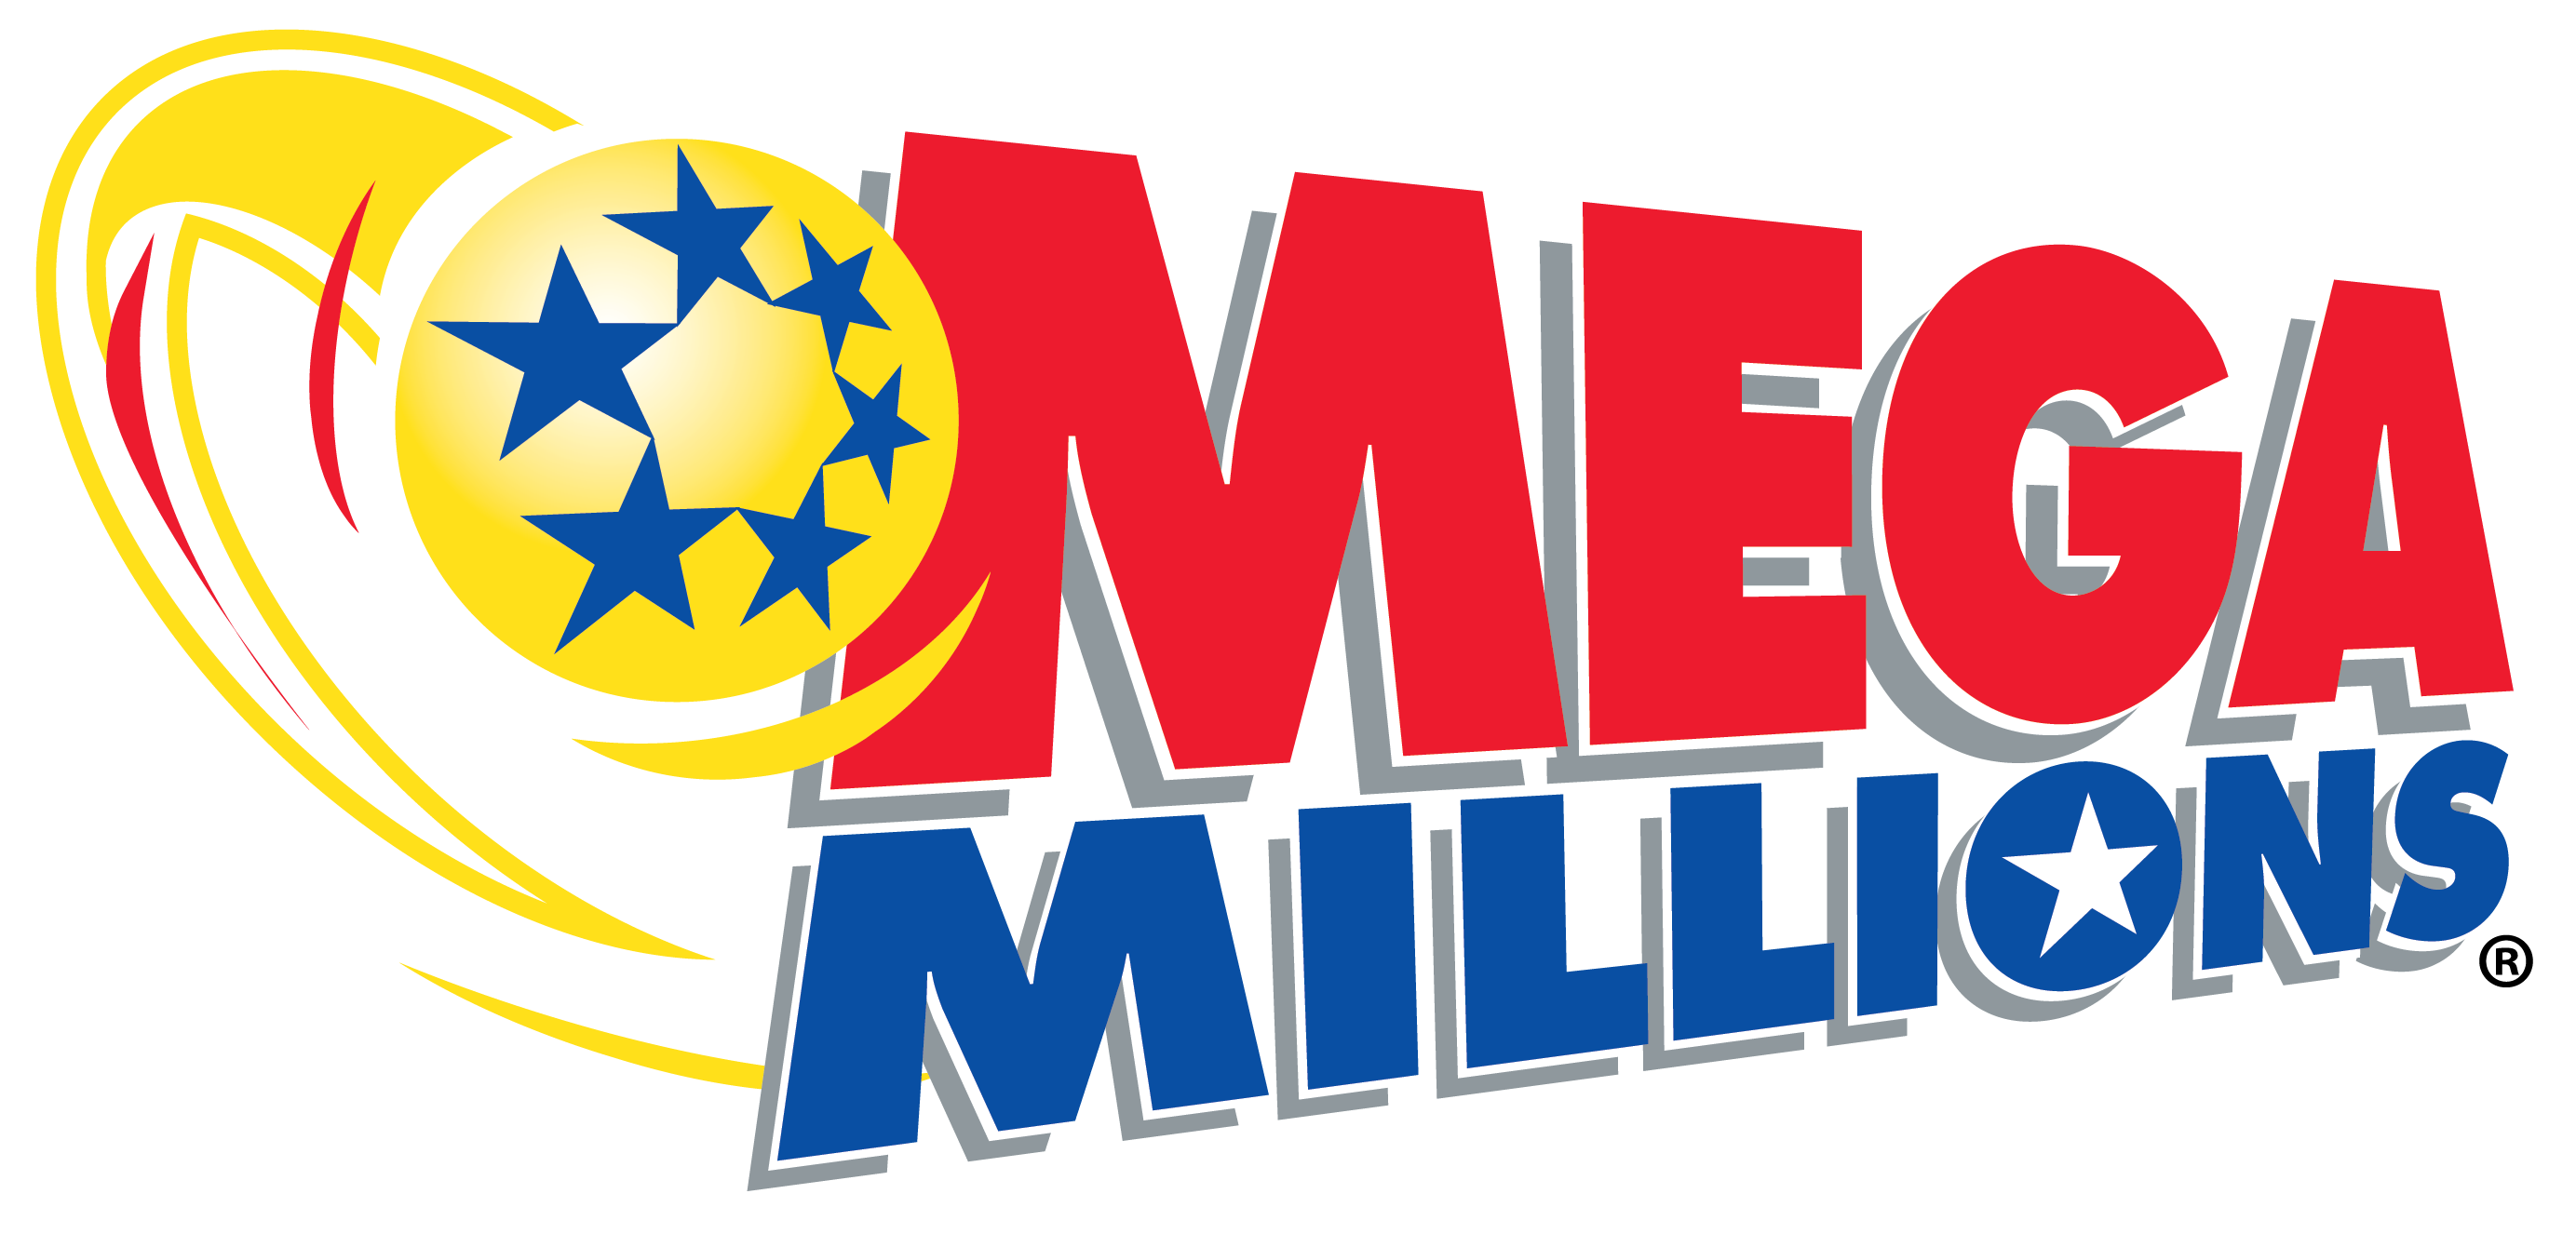 Mega Millions tickets sold out for $1 million in New Jersey with the jackpot rising to $820 million